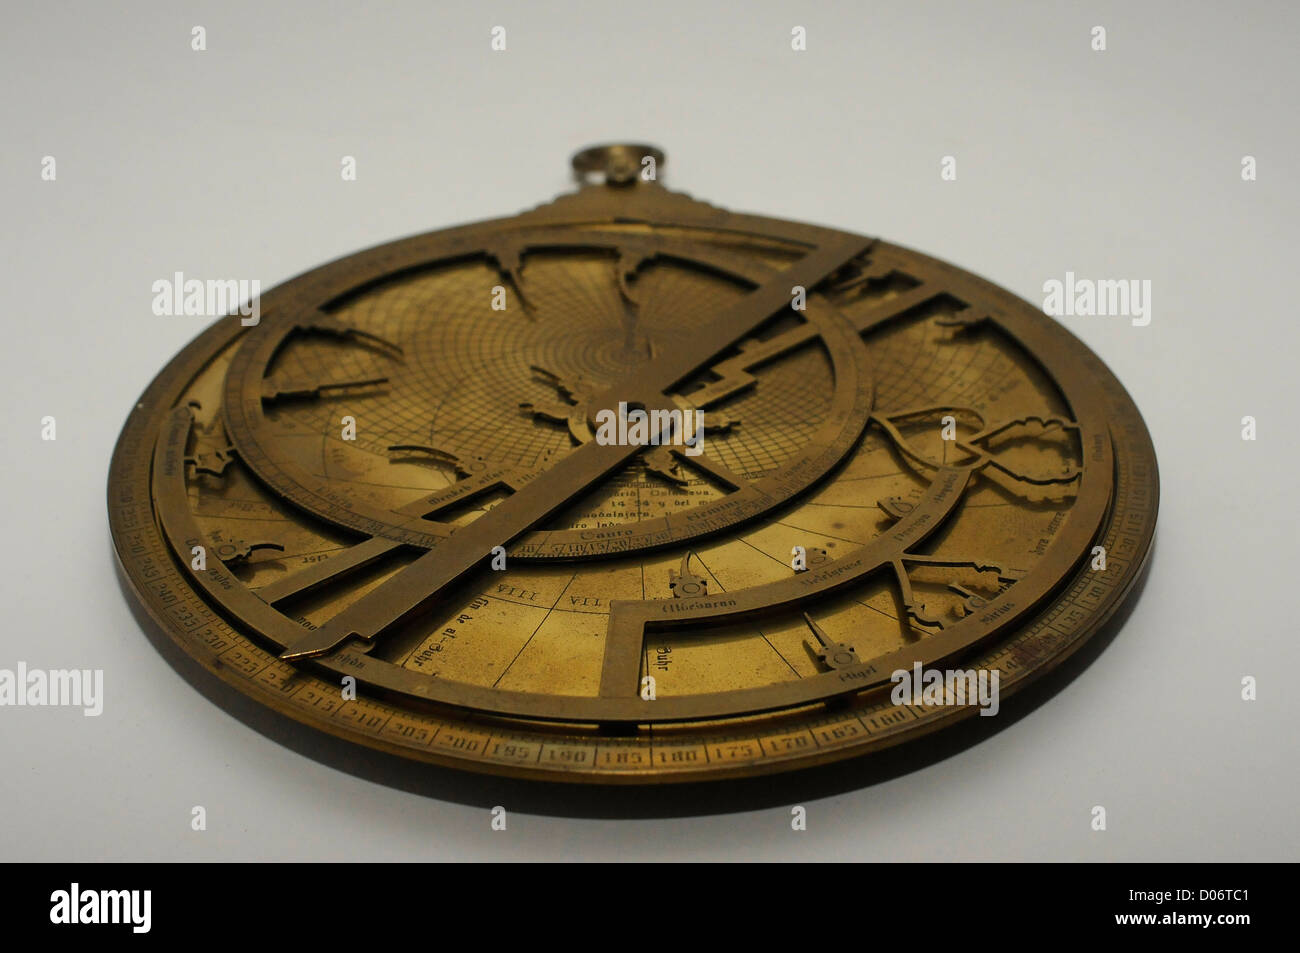 astrolabe is an instrument that have many functions: to calculate the position of the sun and stars, measure the heights .... Stock Photo